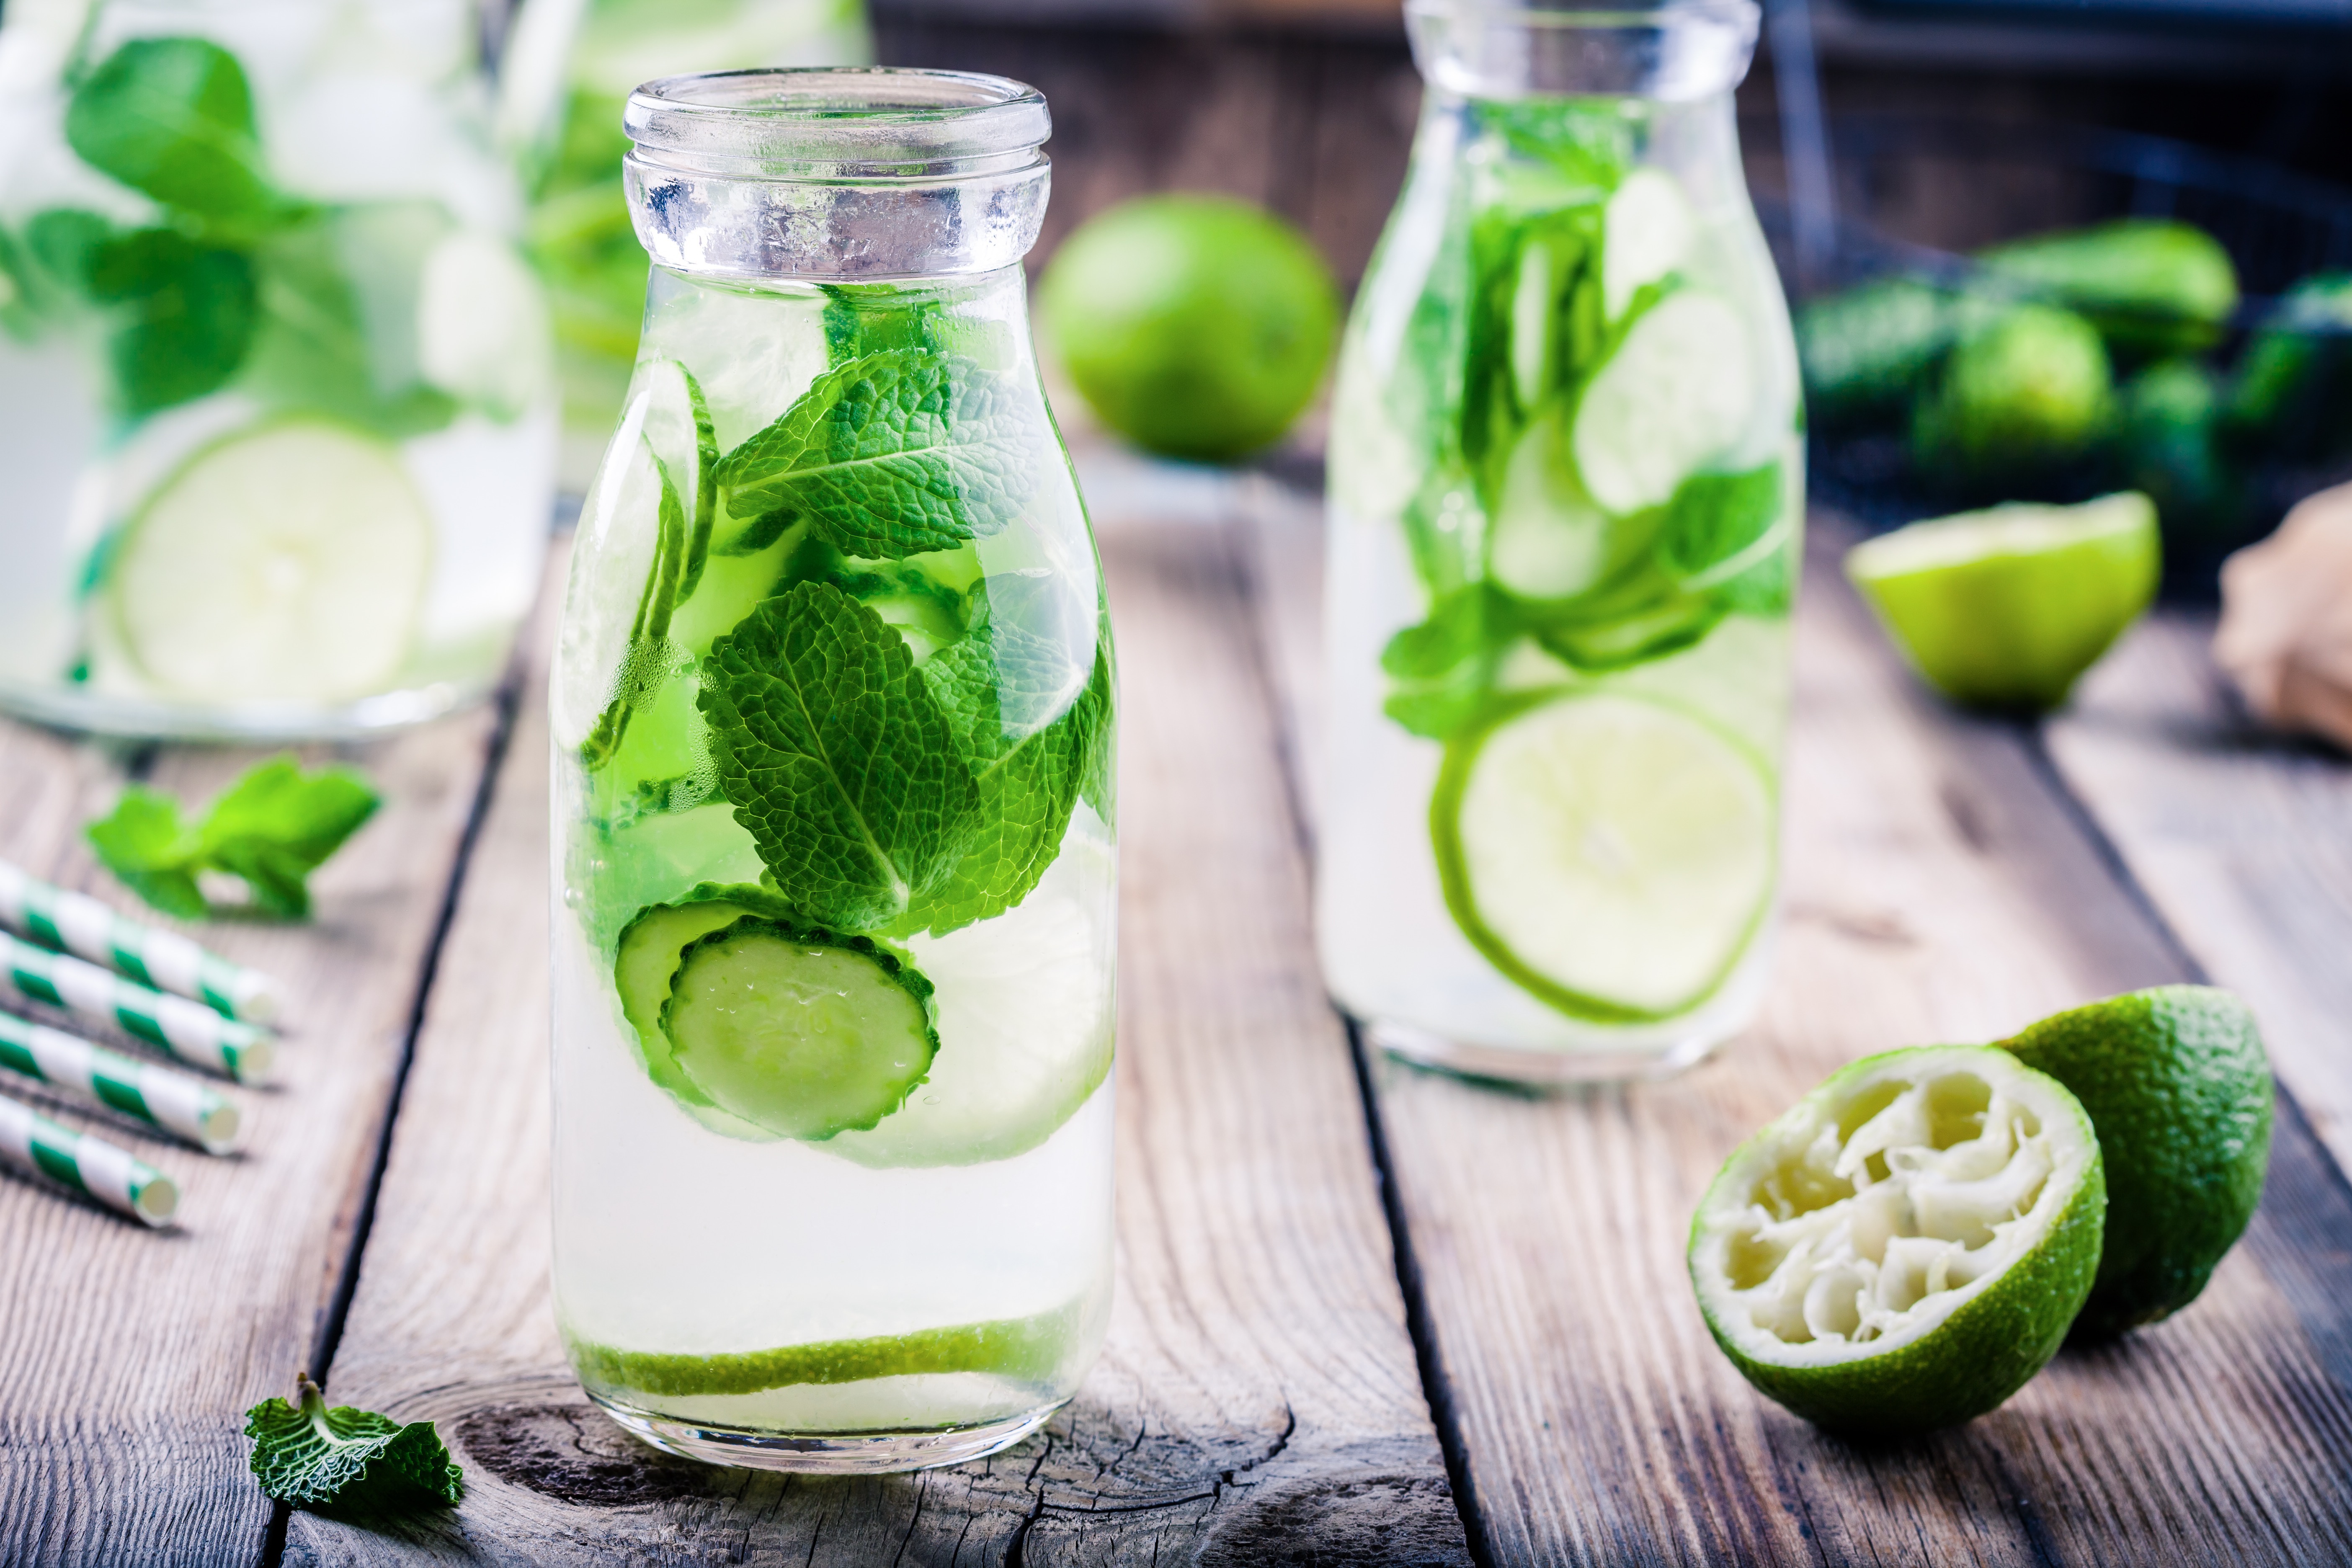 Soda water lime prevents weight gain and inflammation